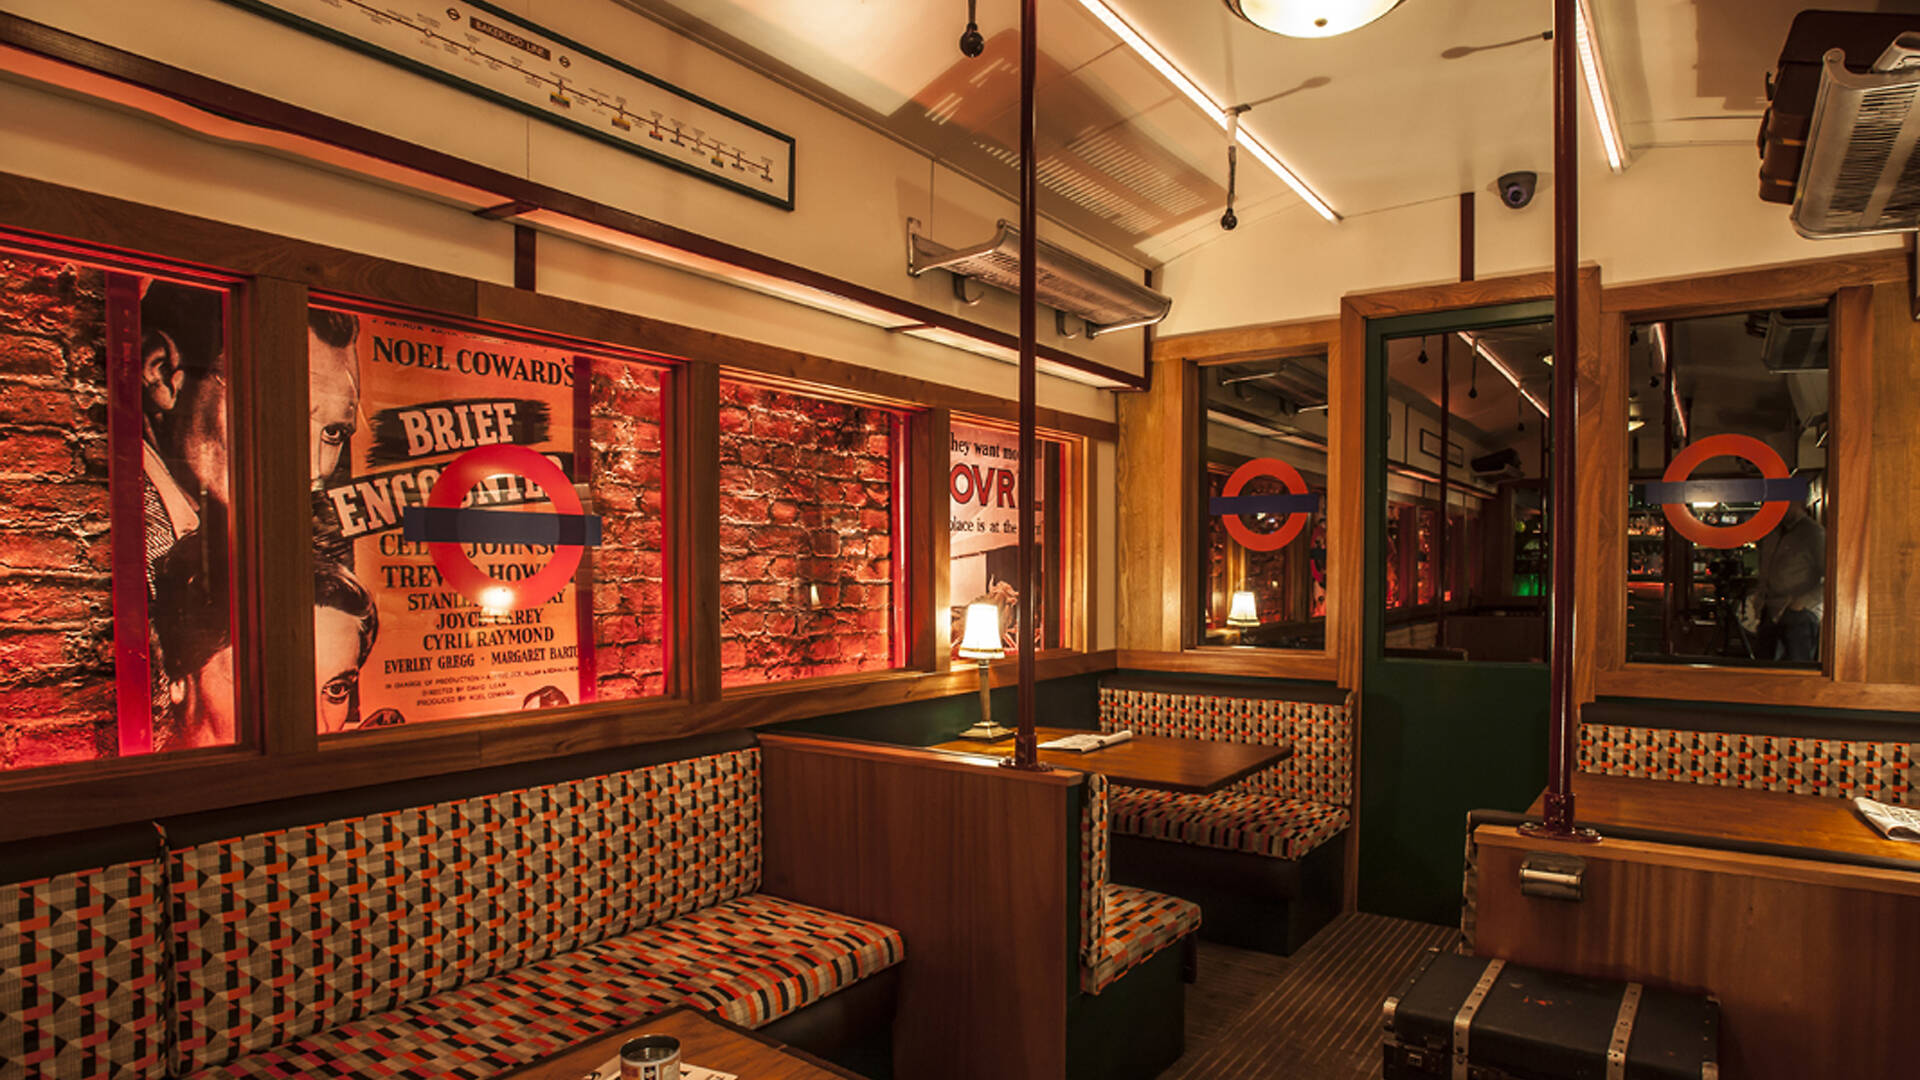 Three restaurant booths, upholstered to look like tube seats, sit tucked against the wall of a red-lit speakeasy.